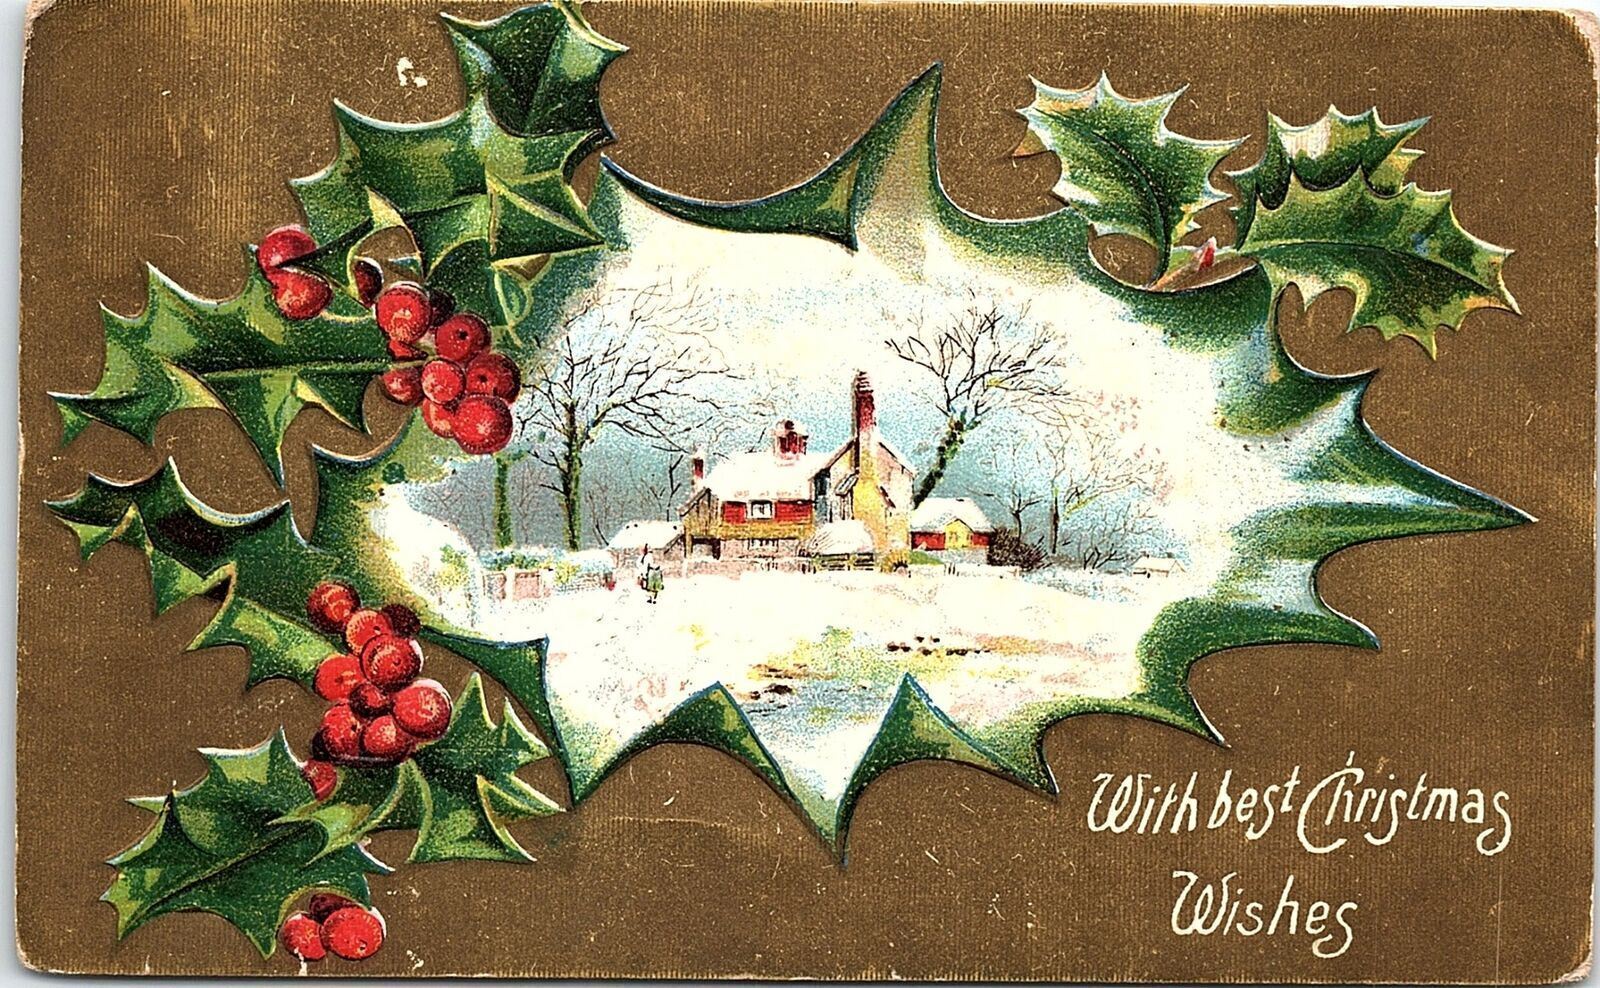 c1915 CHRISTMAS WISHES HOLLY SNOW SCENE OOSTBURG WIS EMBOSSED POSTCARD 41-157